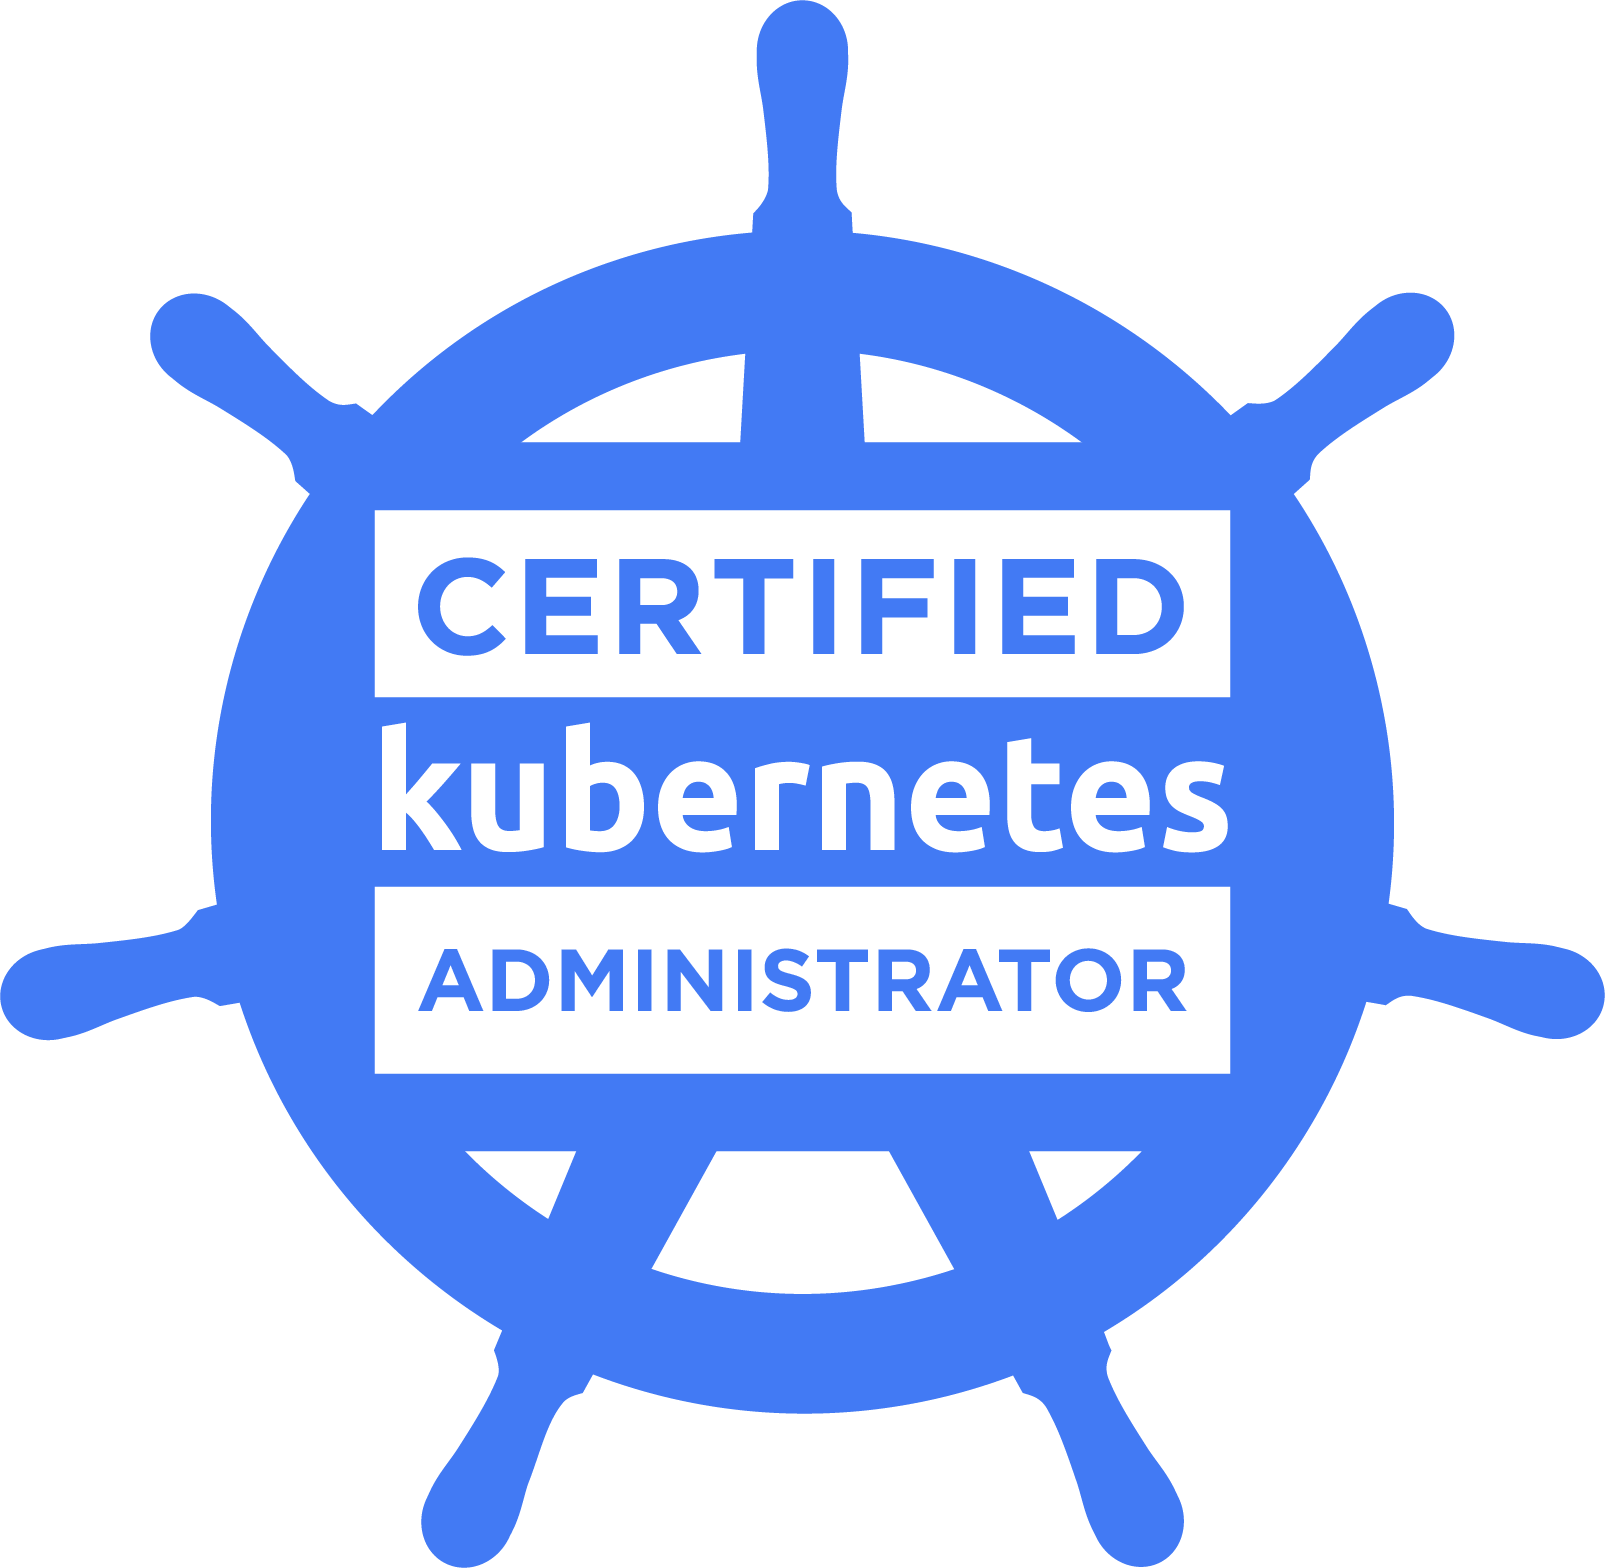 How to prepare for Certified Kubernetes Administrator (CKA) Exam